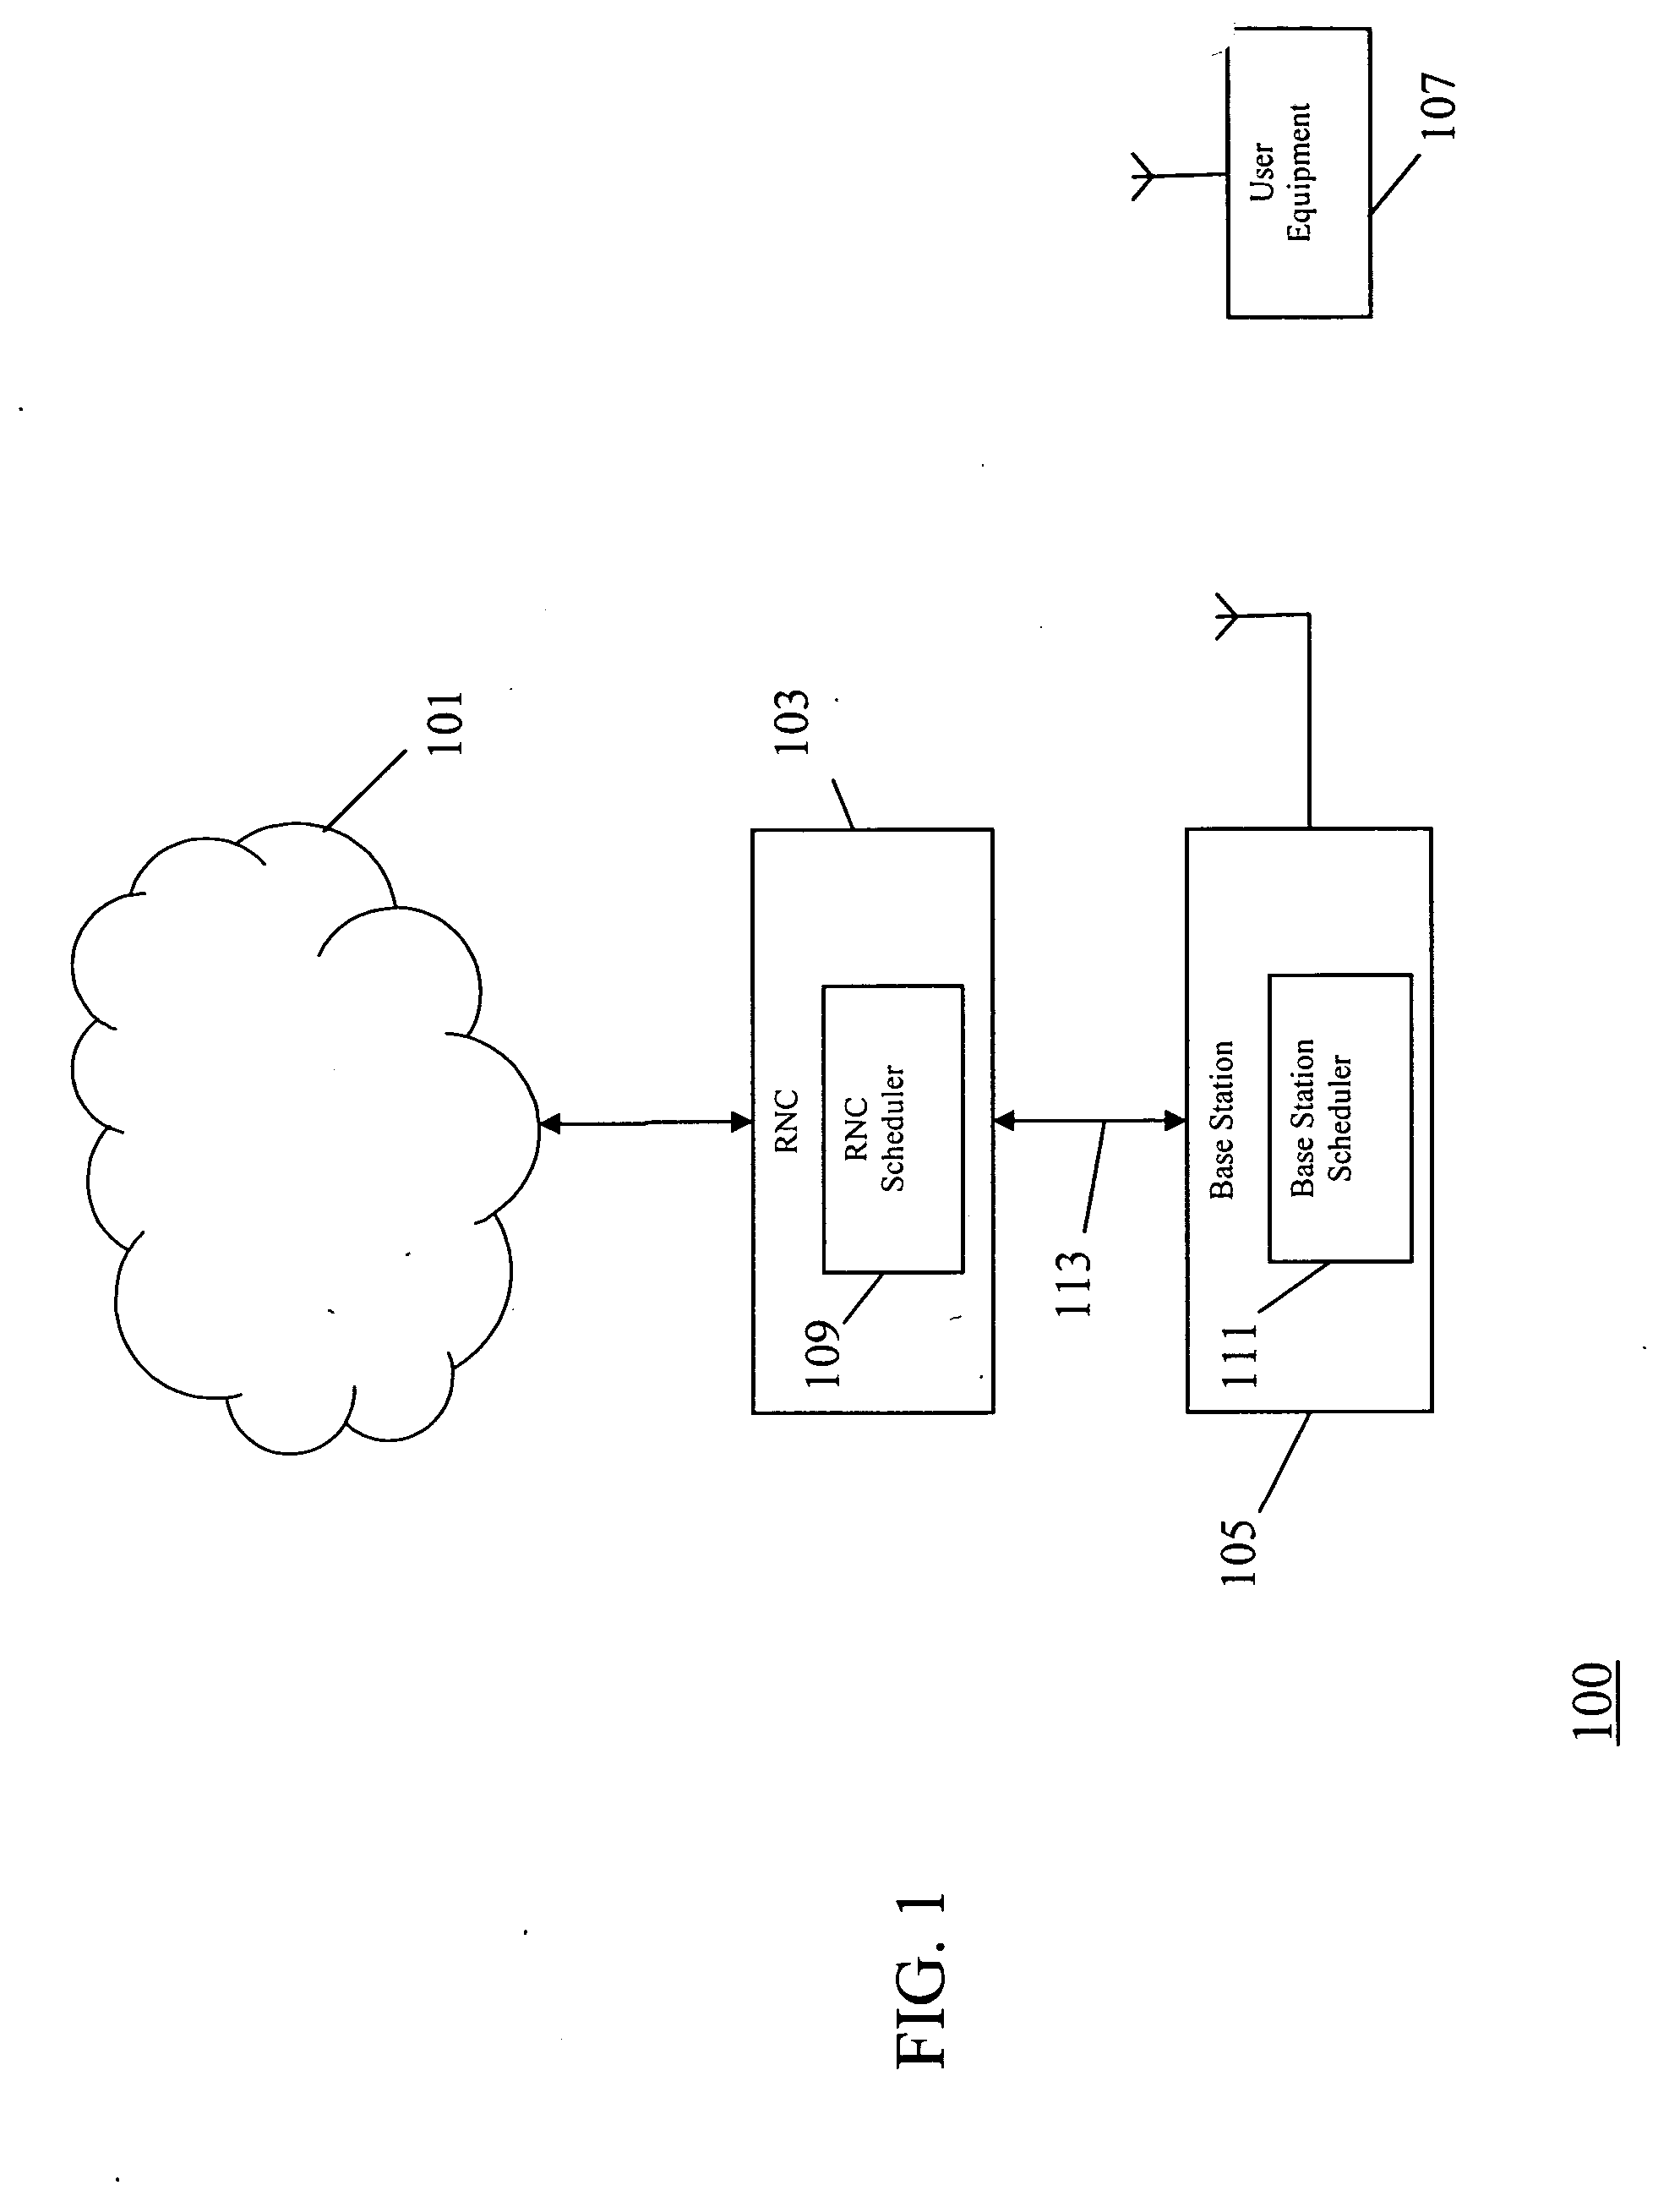 Flow control in a cellular communication system